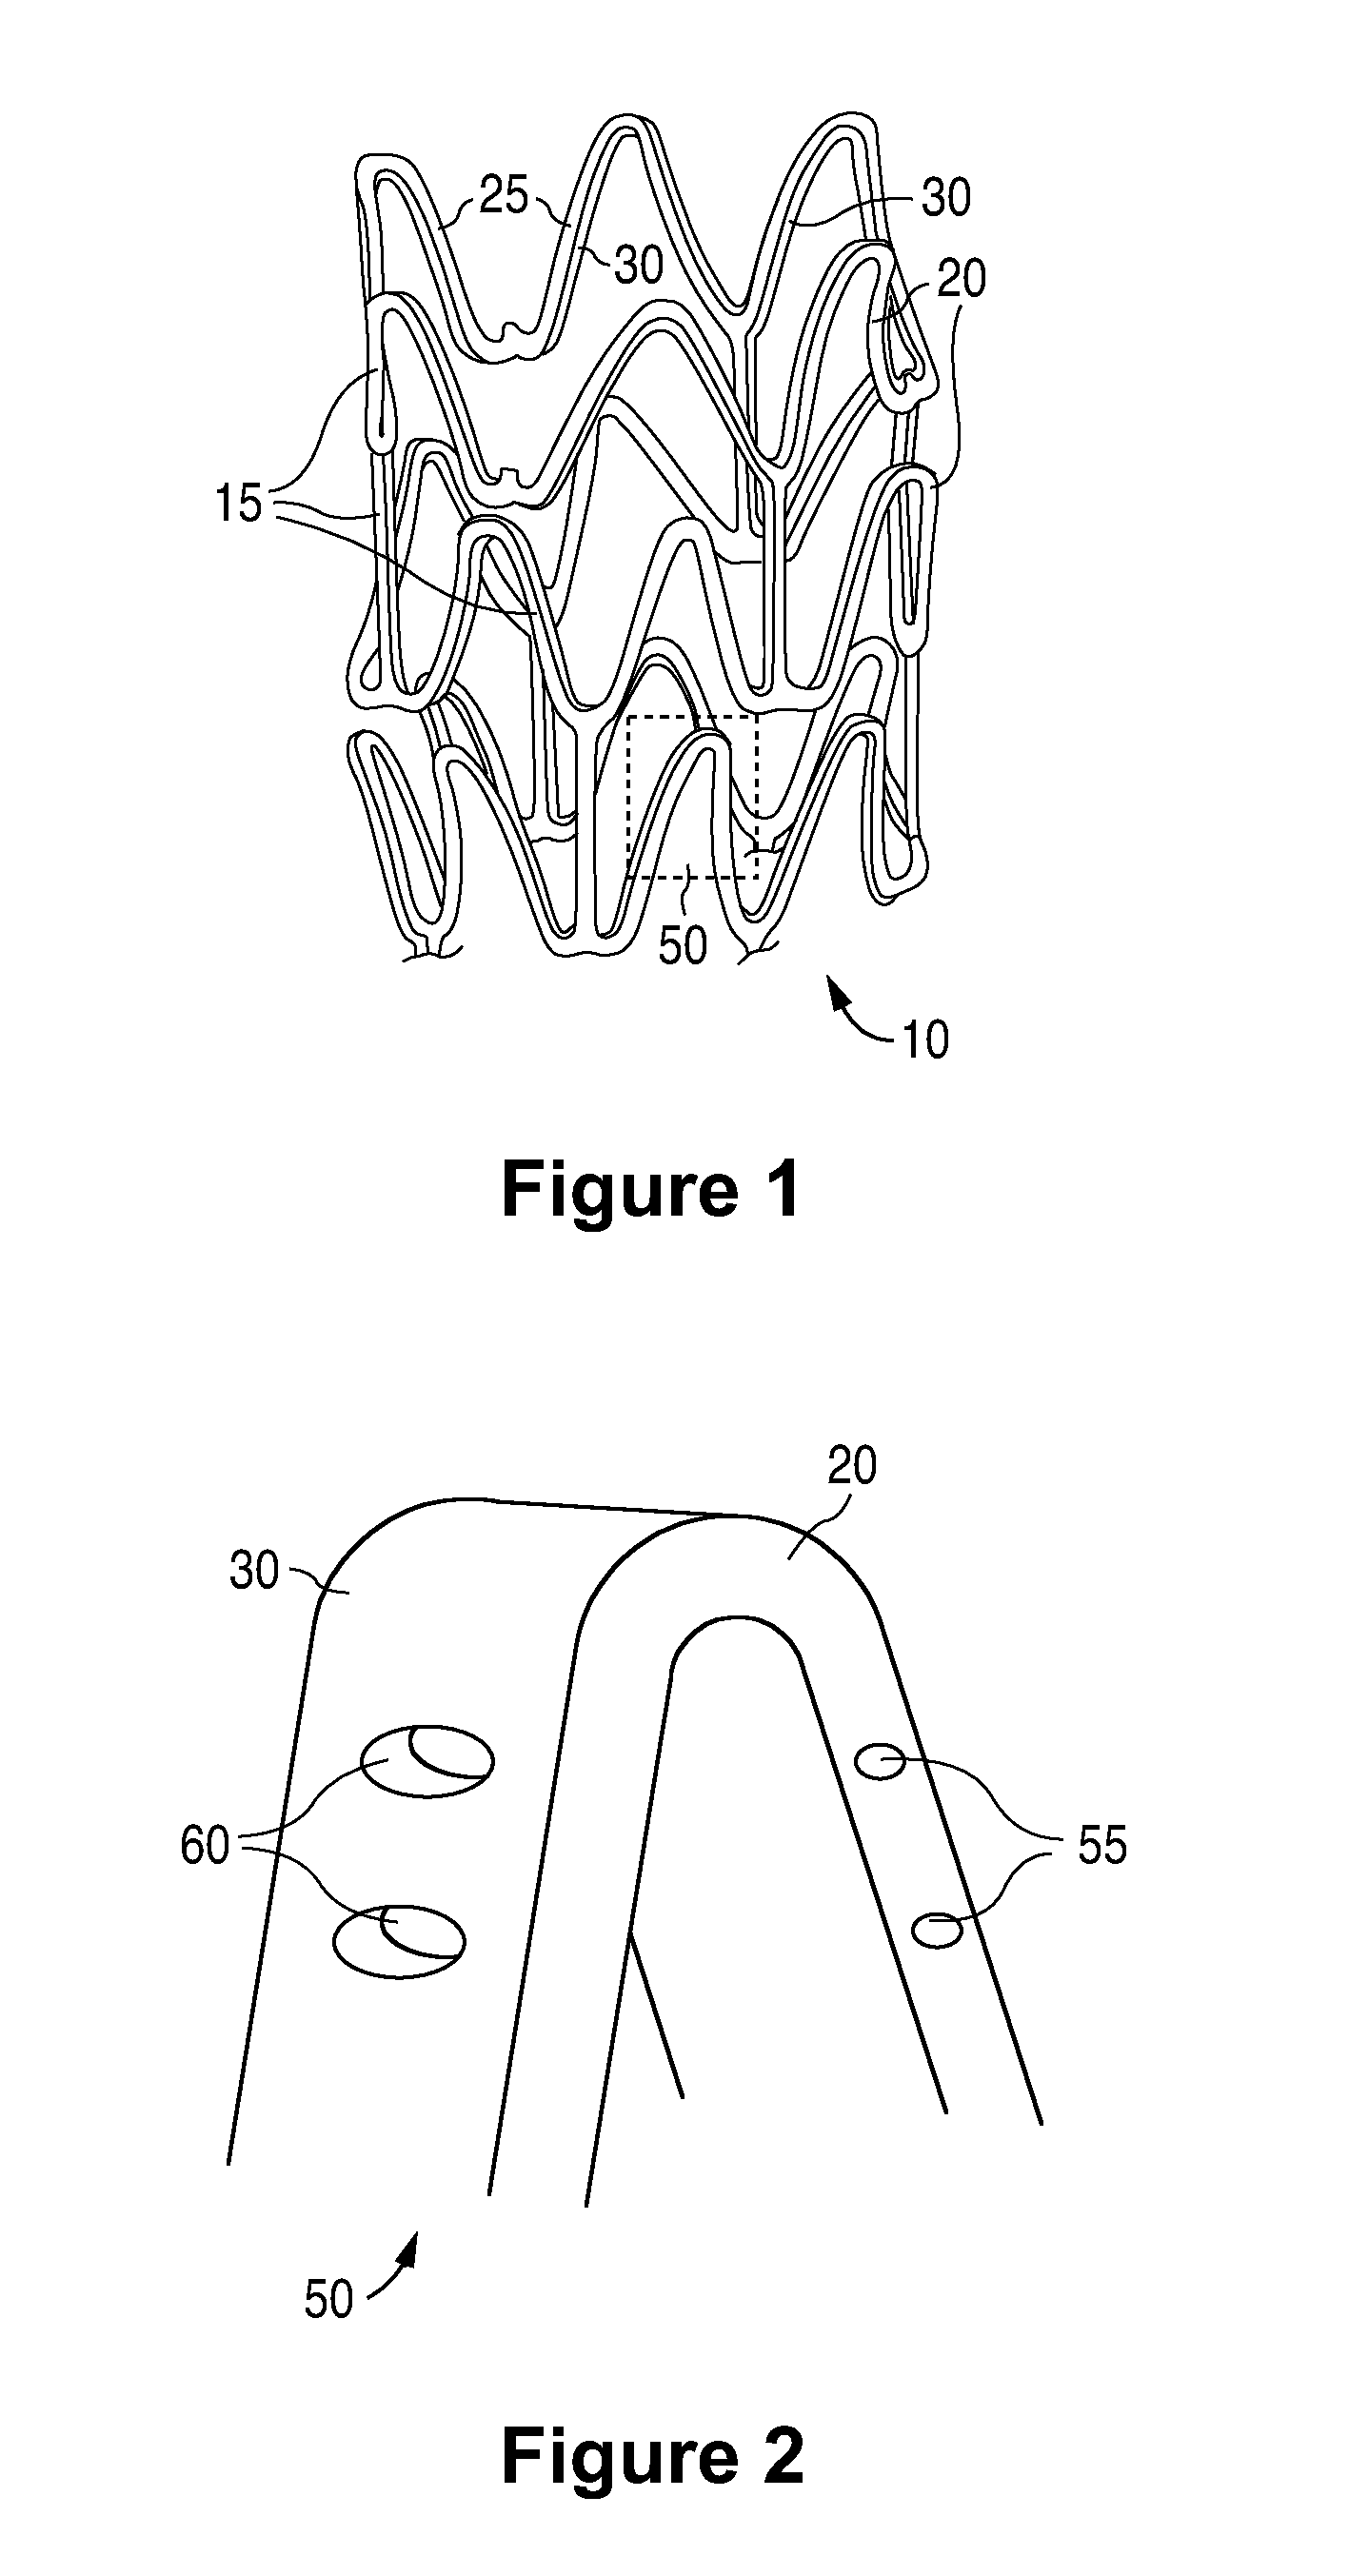 Anti-Proliferative And Anti-Inflammatory Agent Combination For Treatment Of Vascular Disorders With An Implantable Medical Device